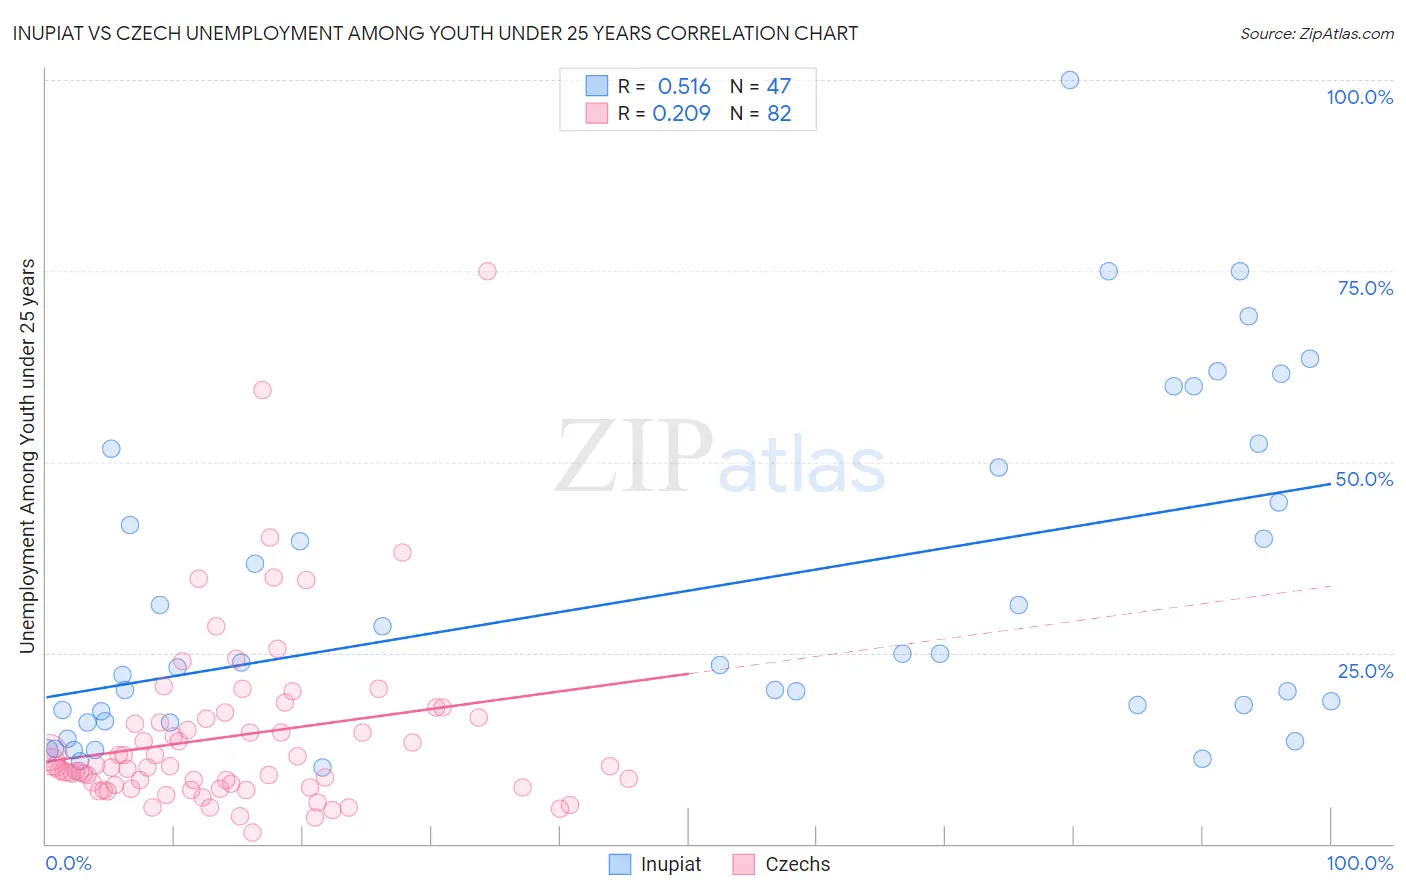 Inupiat vs Czech Unemployment Among Youth under 25 years